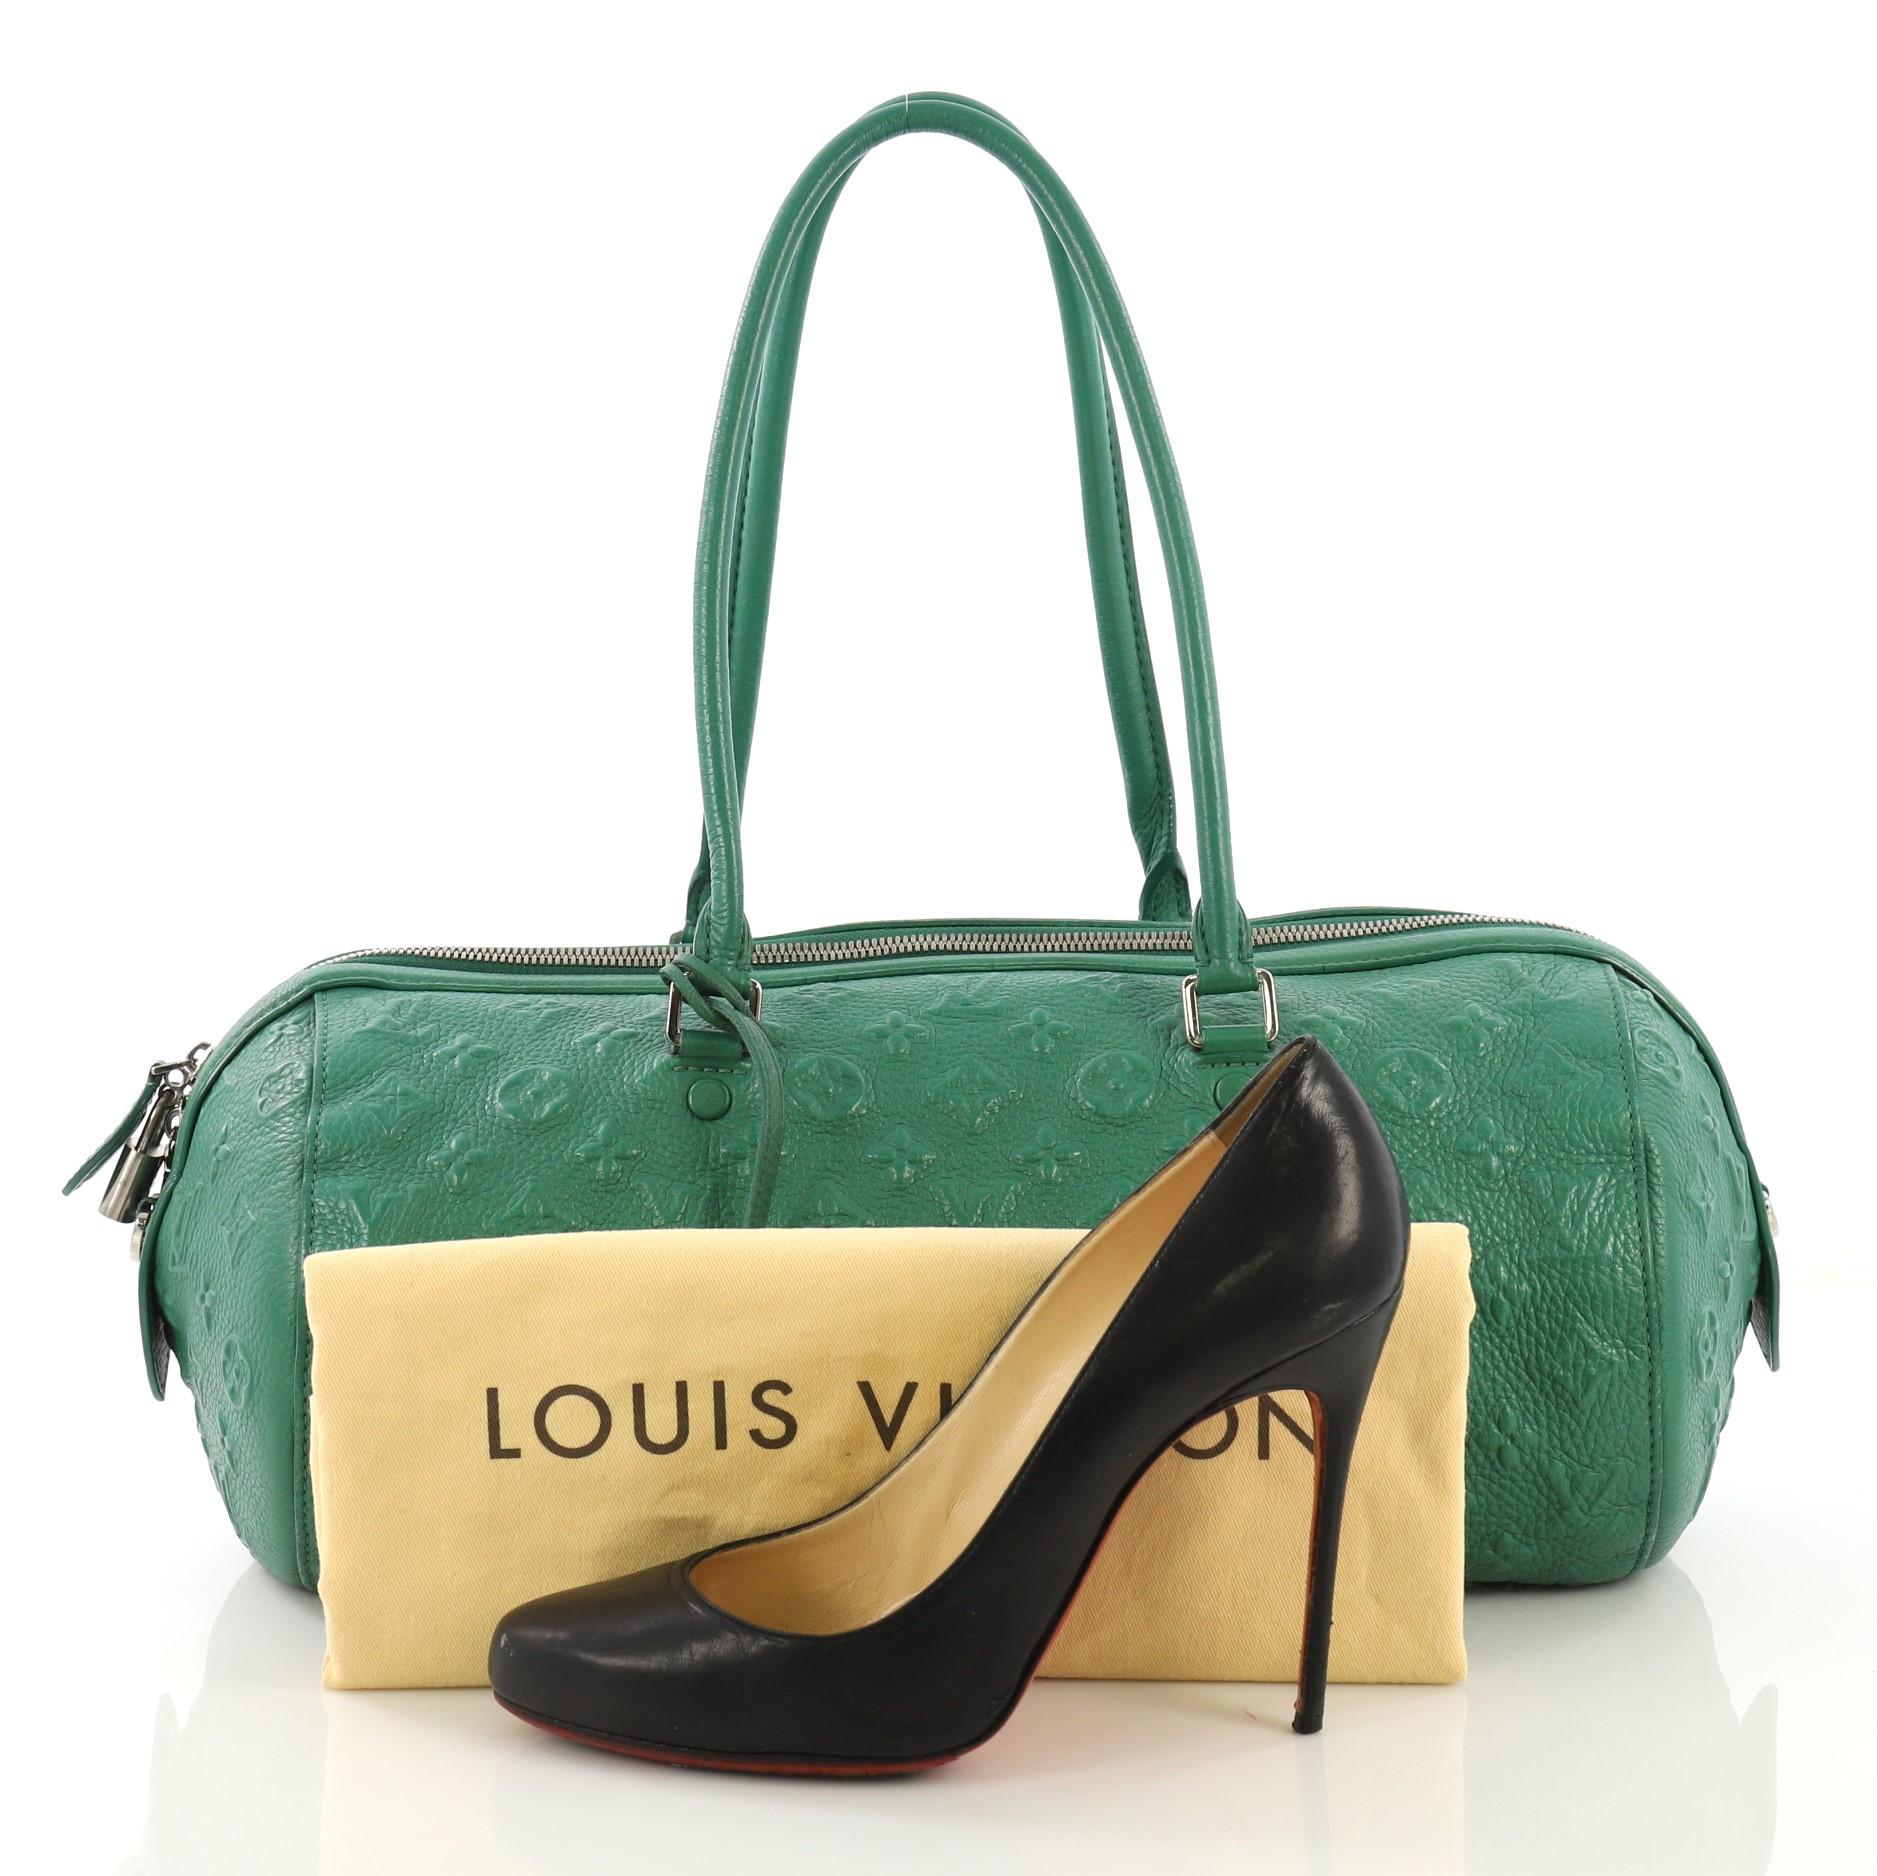 This Louis Vuitton Neo Papillon Handbag Monogram Revelation GM, constructed in green monogram Revelation leather, features tall dual-rolled leather top handles, protective leather base tabs and silver-tone hardware. Its zip closure opens to a